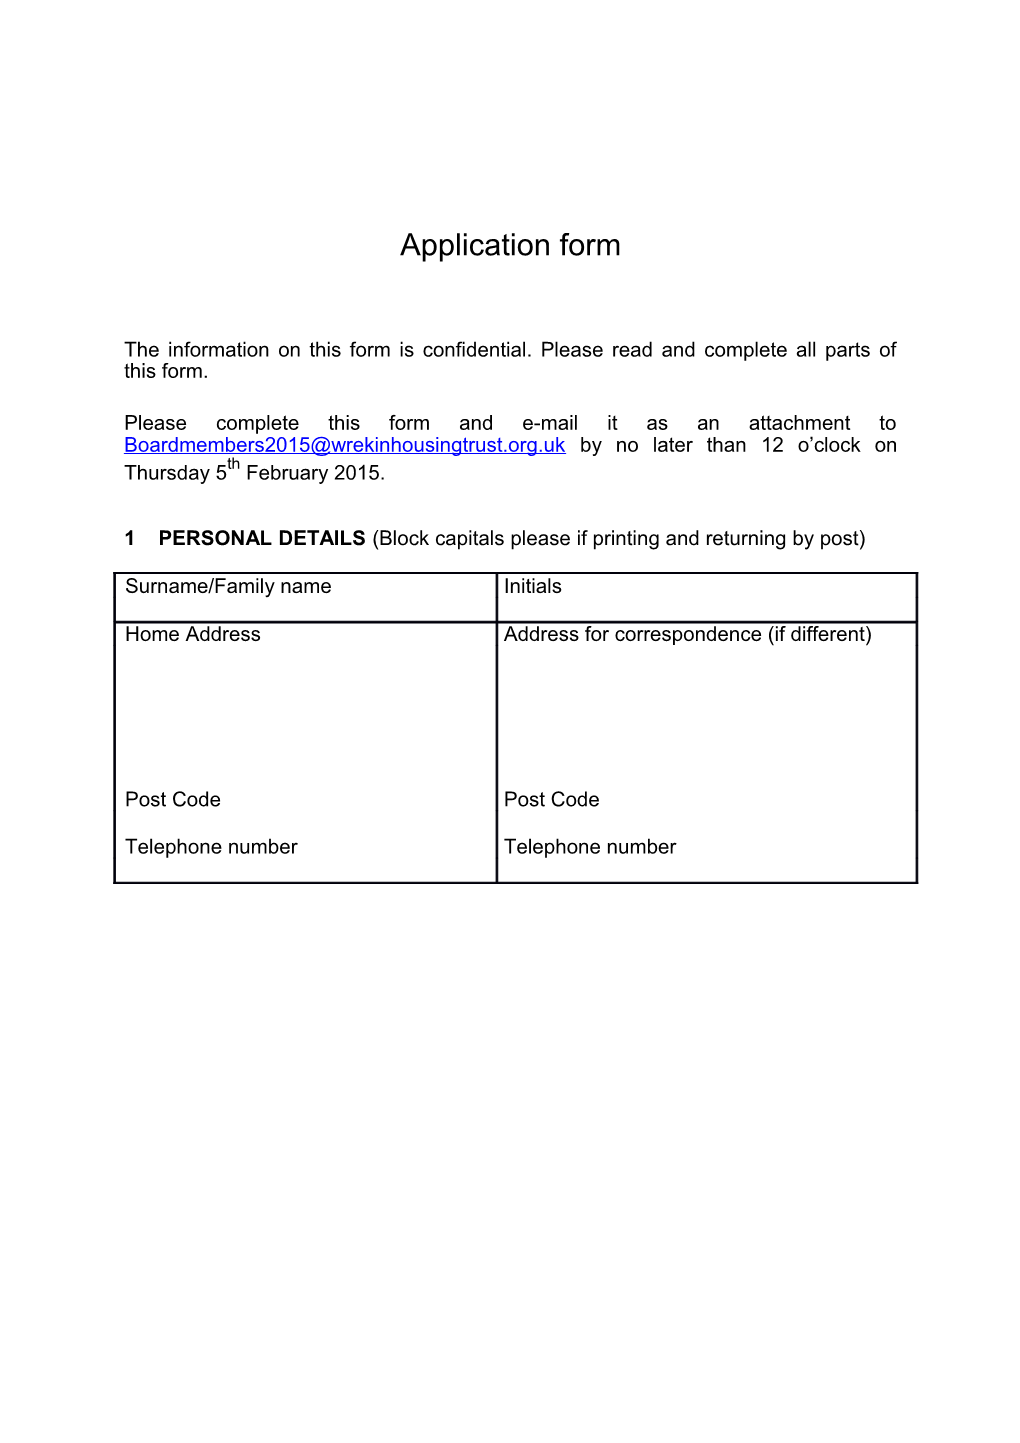 The Information on This Form Is Confidential. Please Read and Complete All Parts of This Form